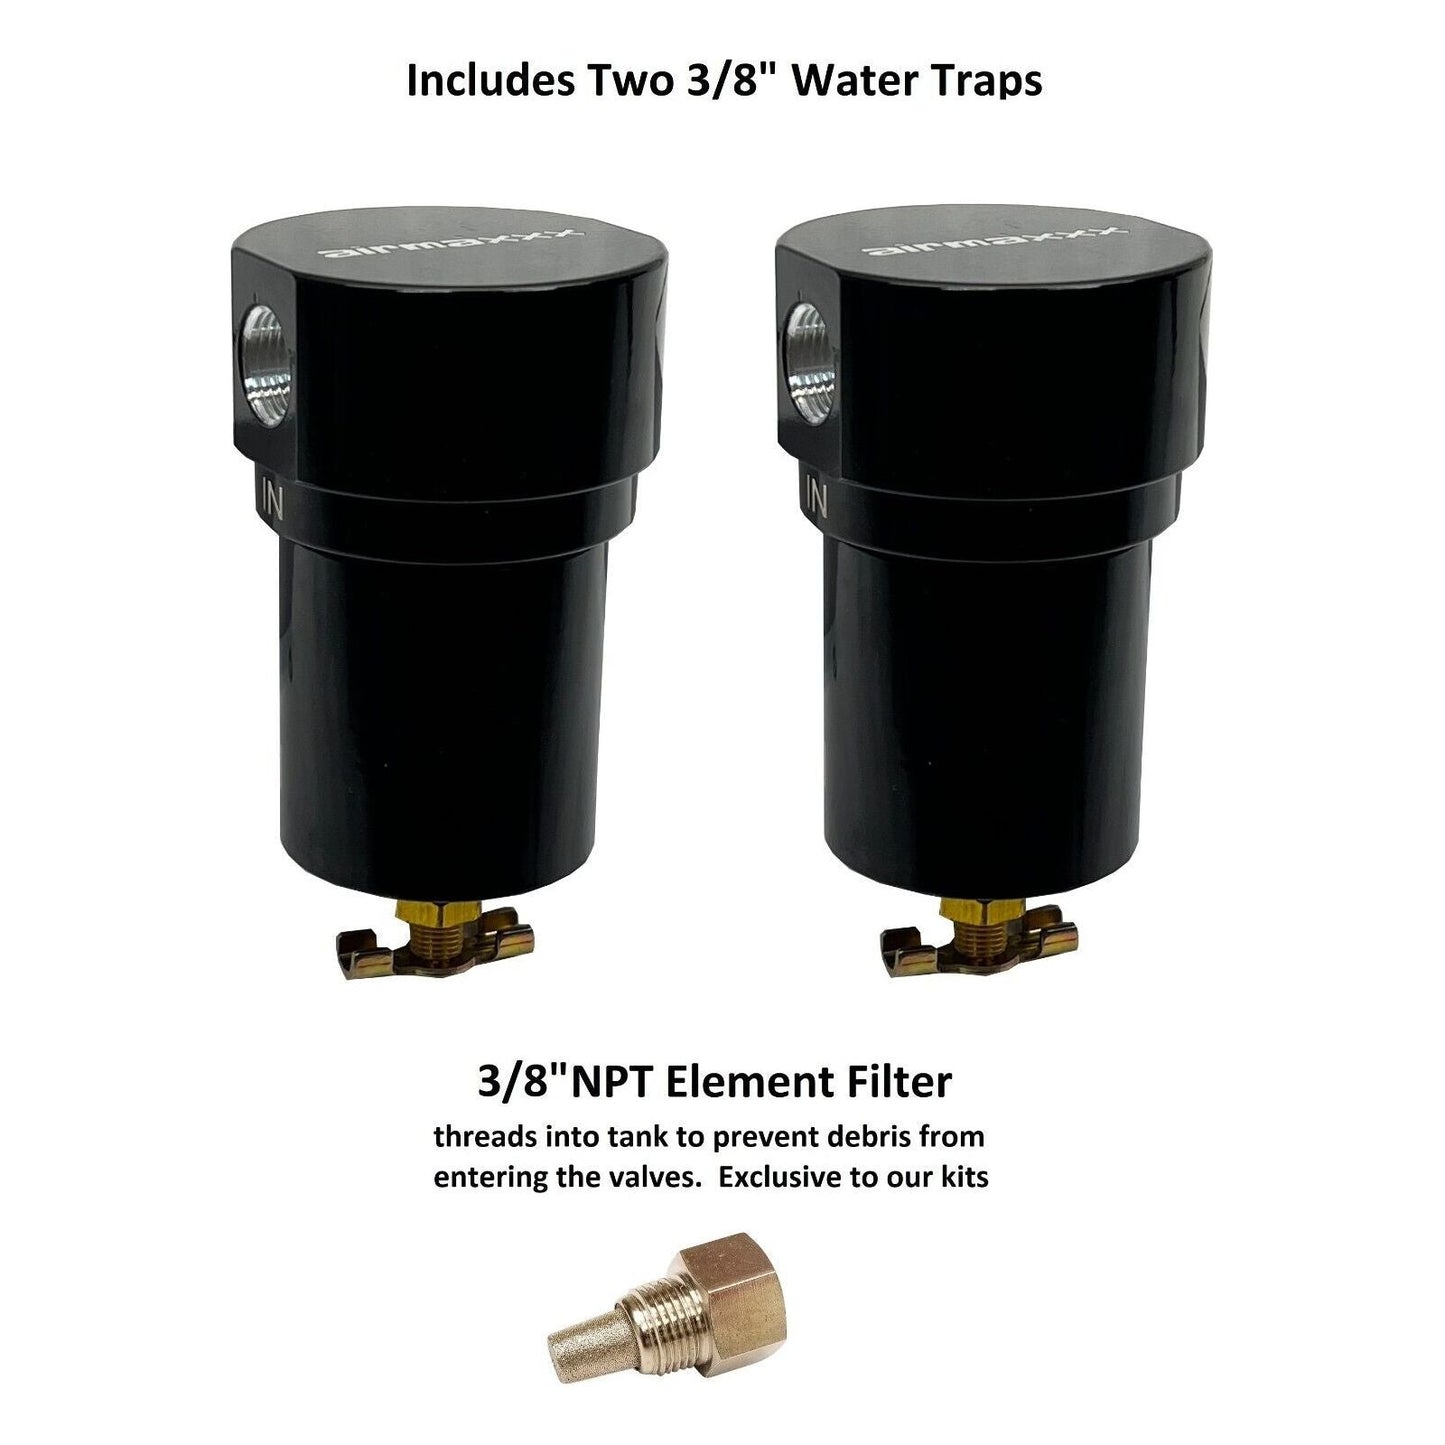 water traps and NPT element filter